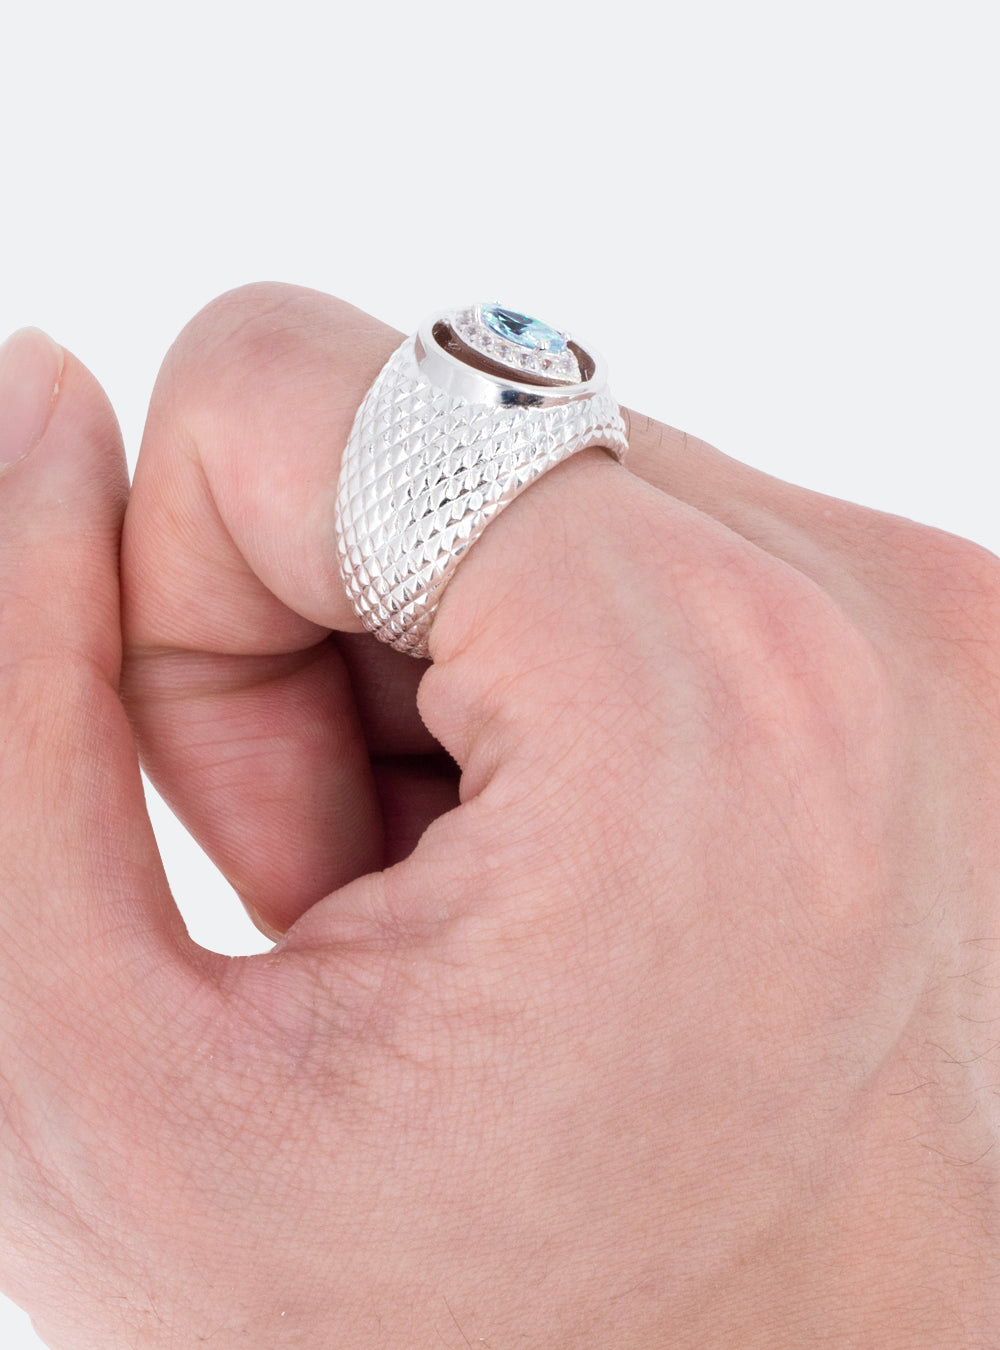 A man's hand holding a MIDNIGHTFACTORY Cat-eye cutout cocktail signet ring with a blue topaz stone.